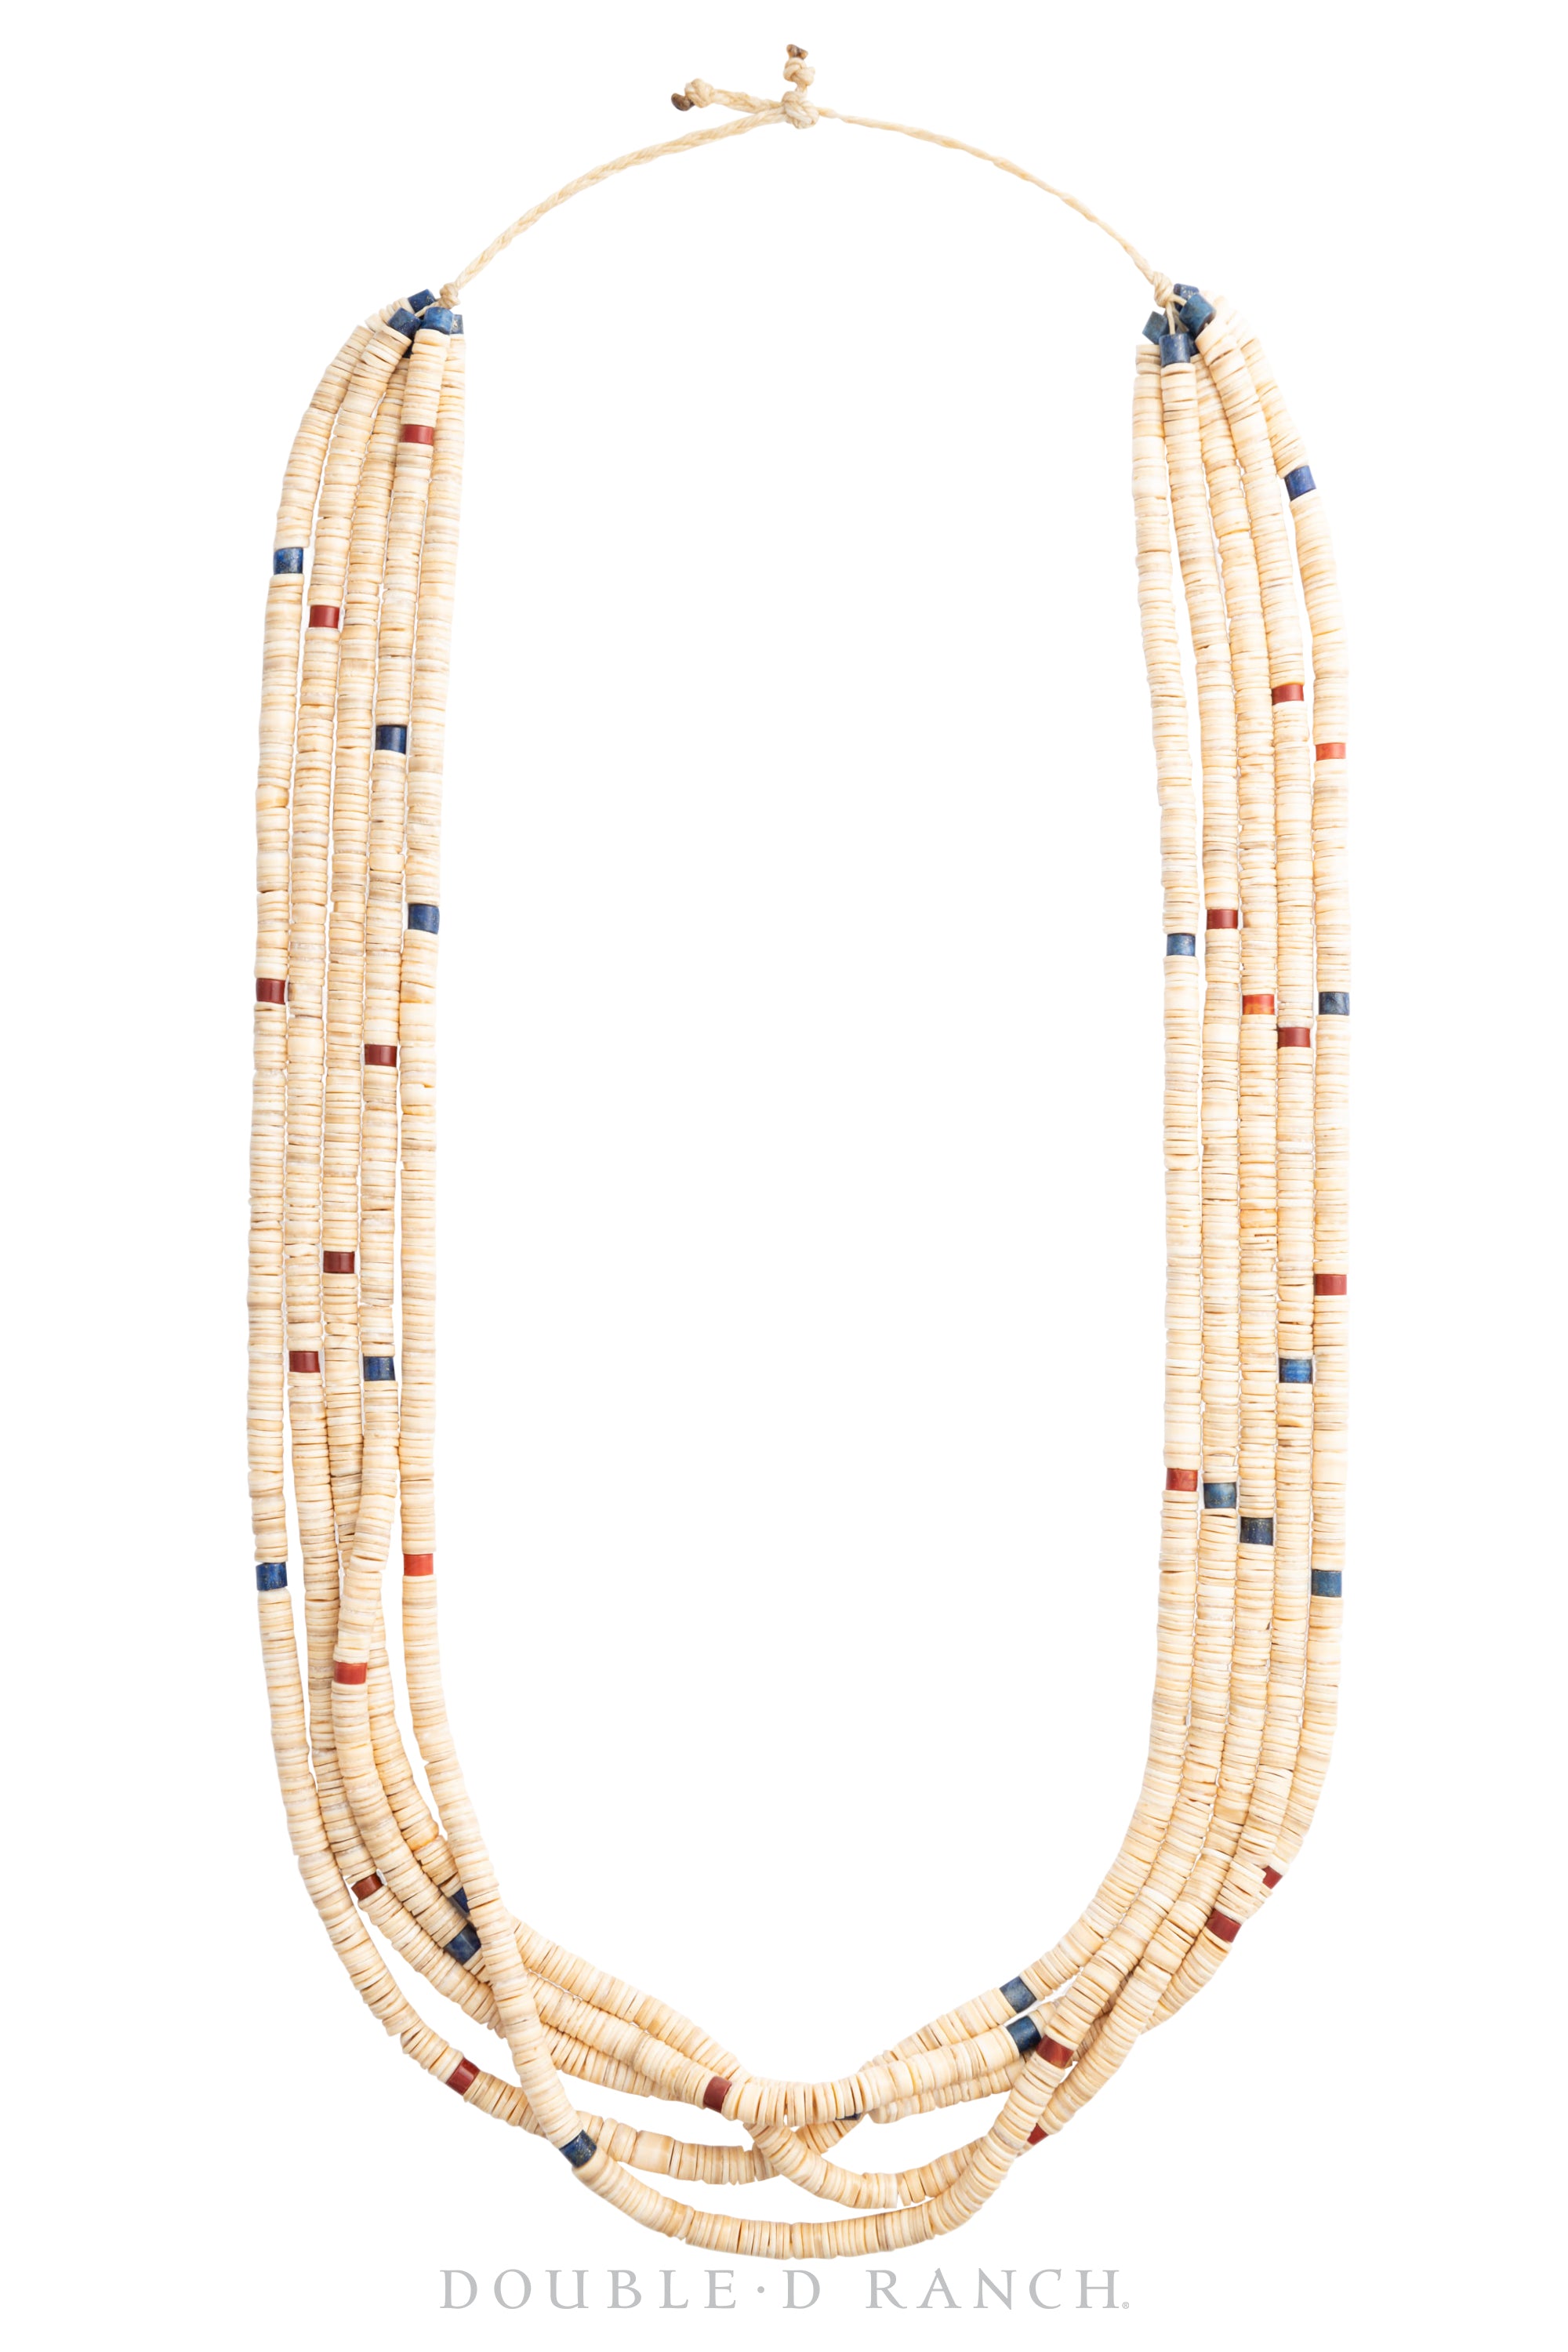 Necklace, Natural Stone, Shell Heishi with Apple Coral & Lapis, 5 Strands, Artisan, Contemporary, 1761